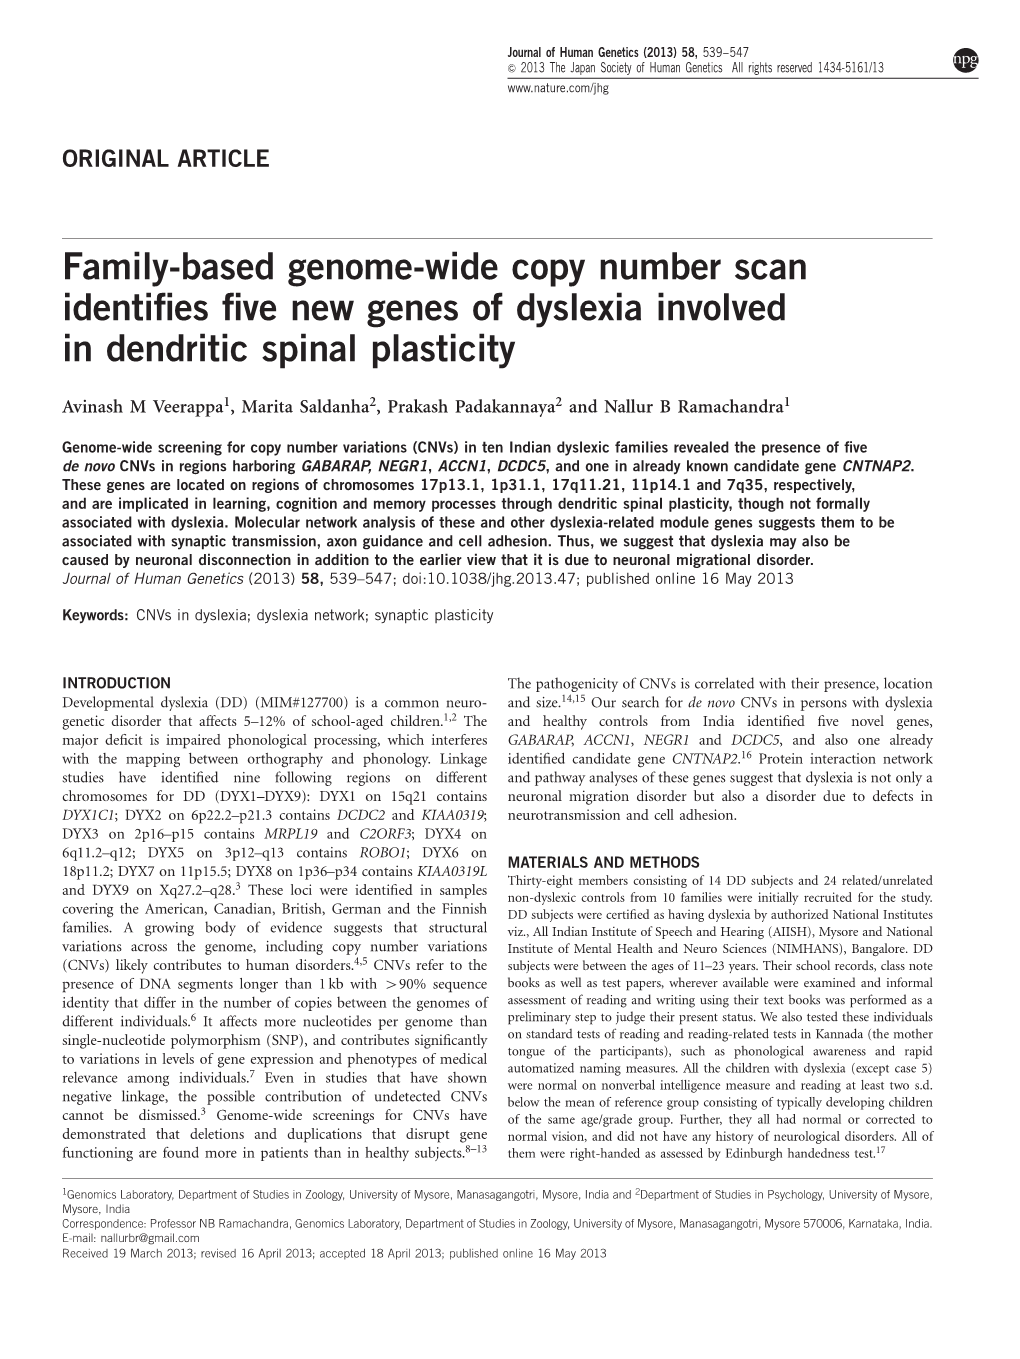 Family-Based Genome-Wide Copy Number Scan Identifies Five